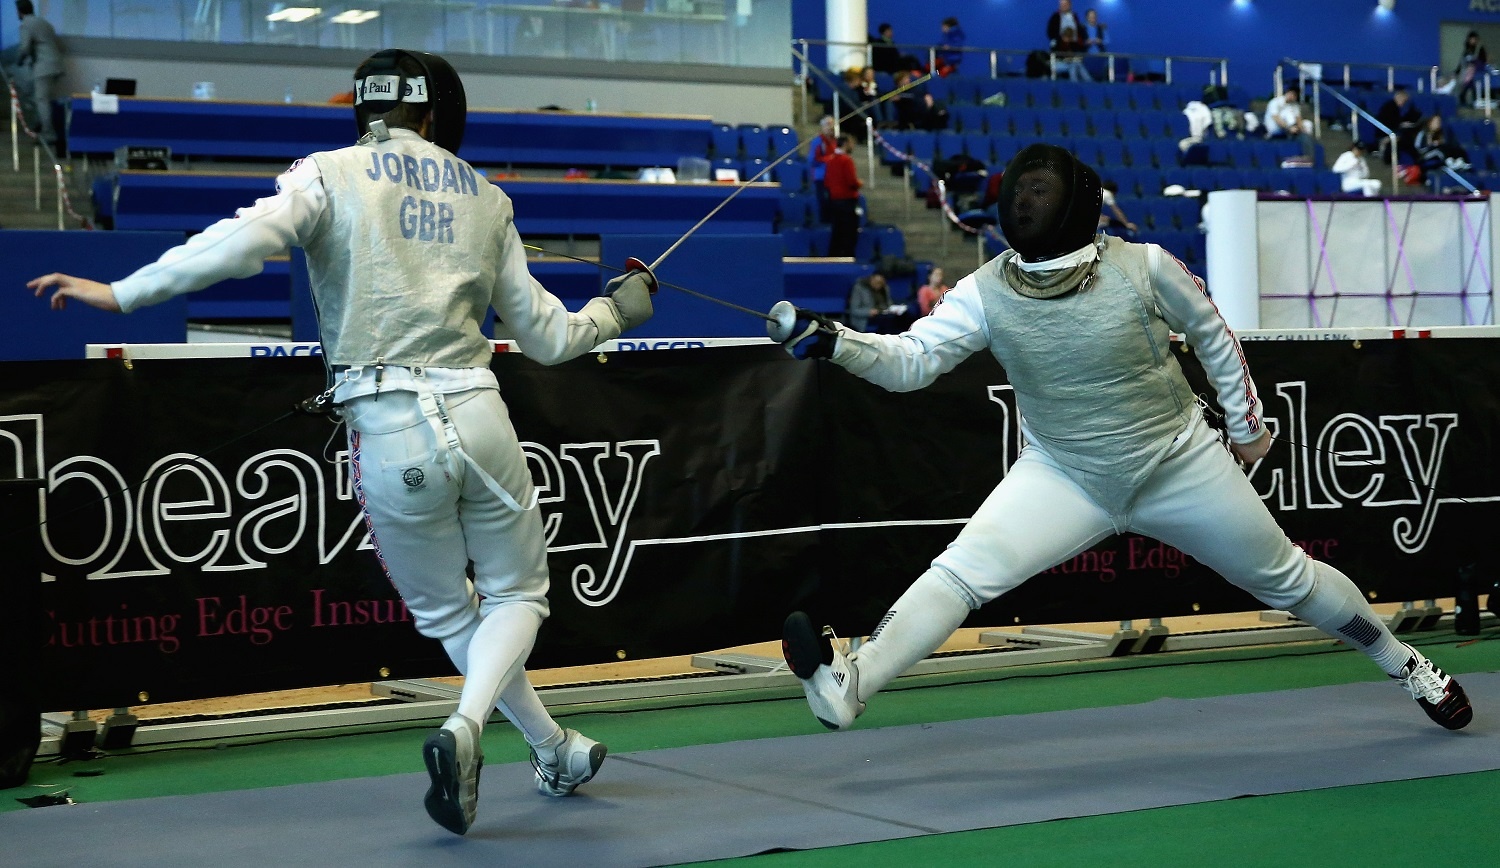 Find Out Who Are the Greatest Fencing Athletes